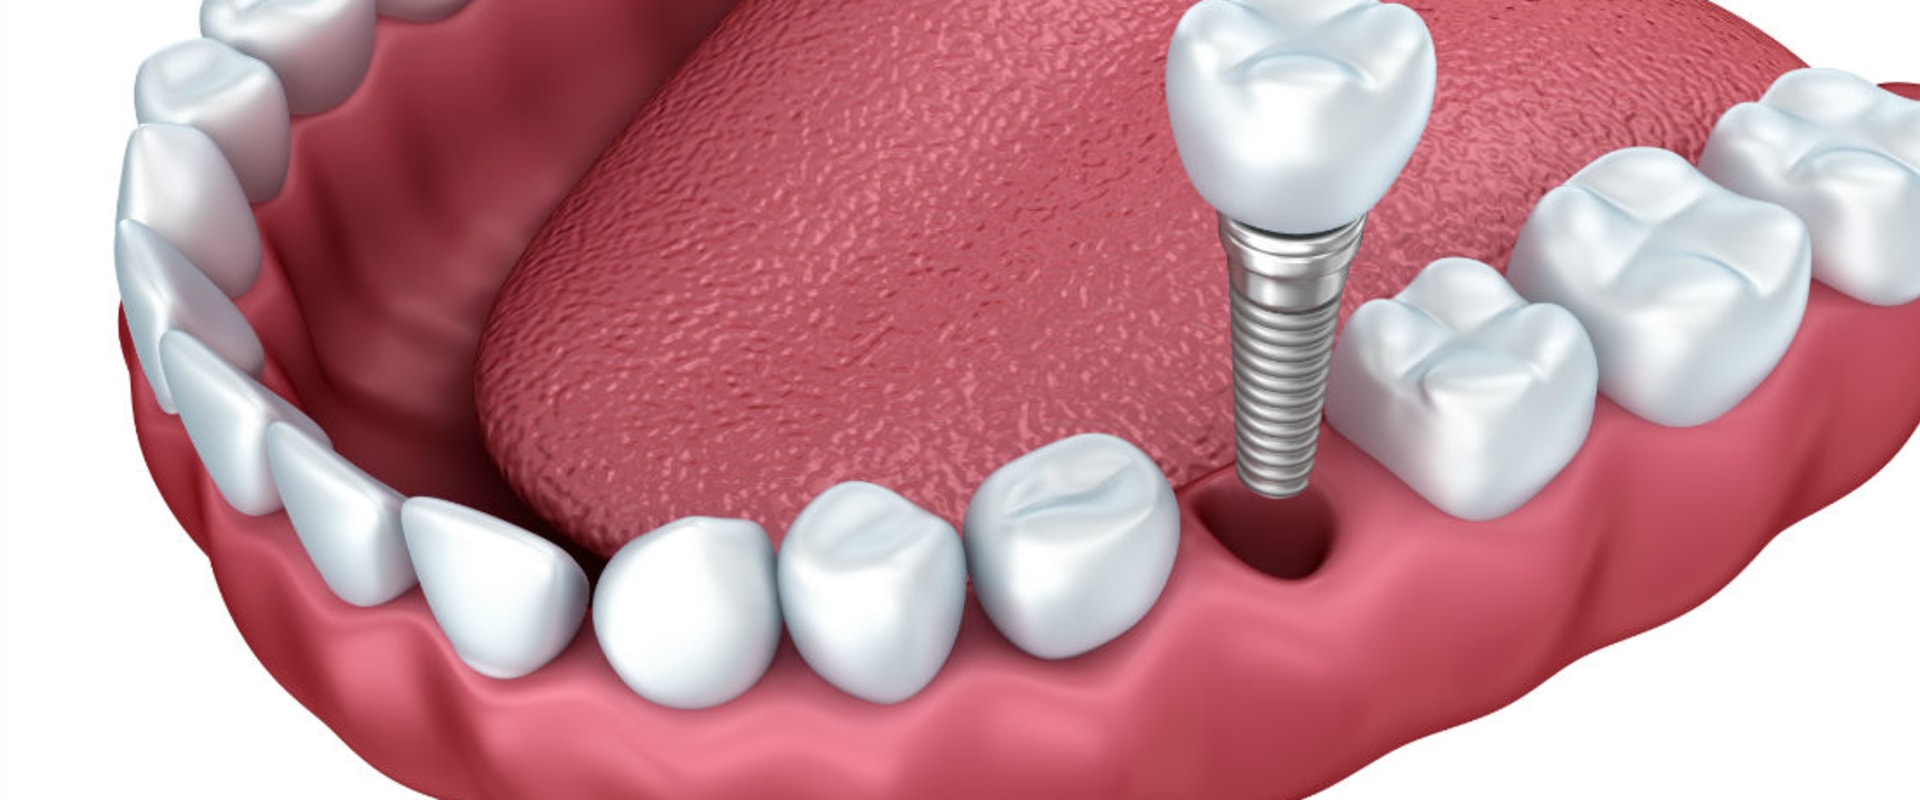 Are Dental Implants Permanently Attached?